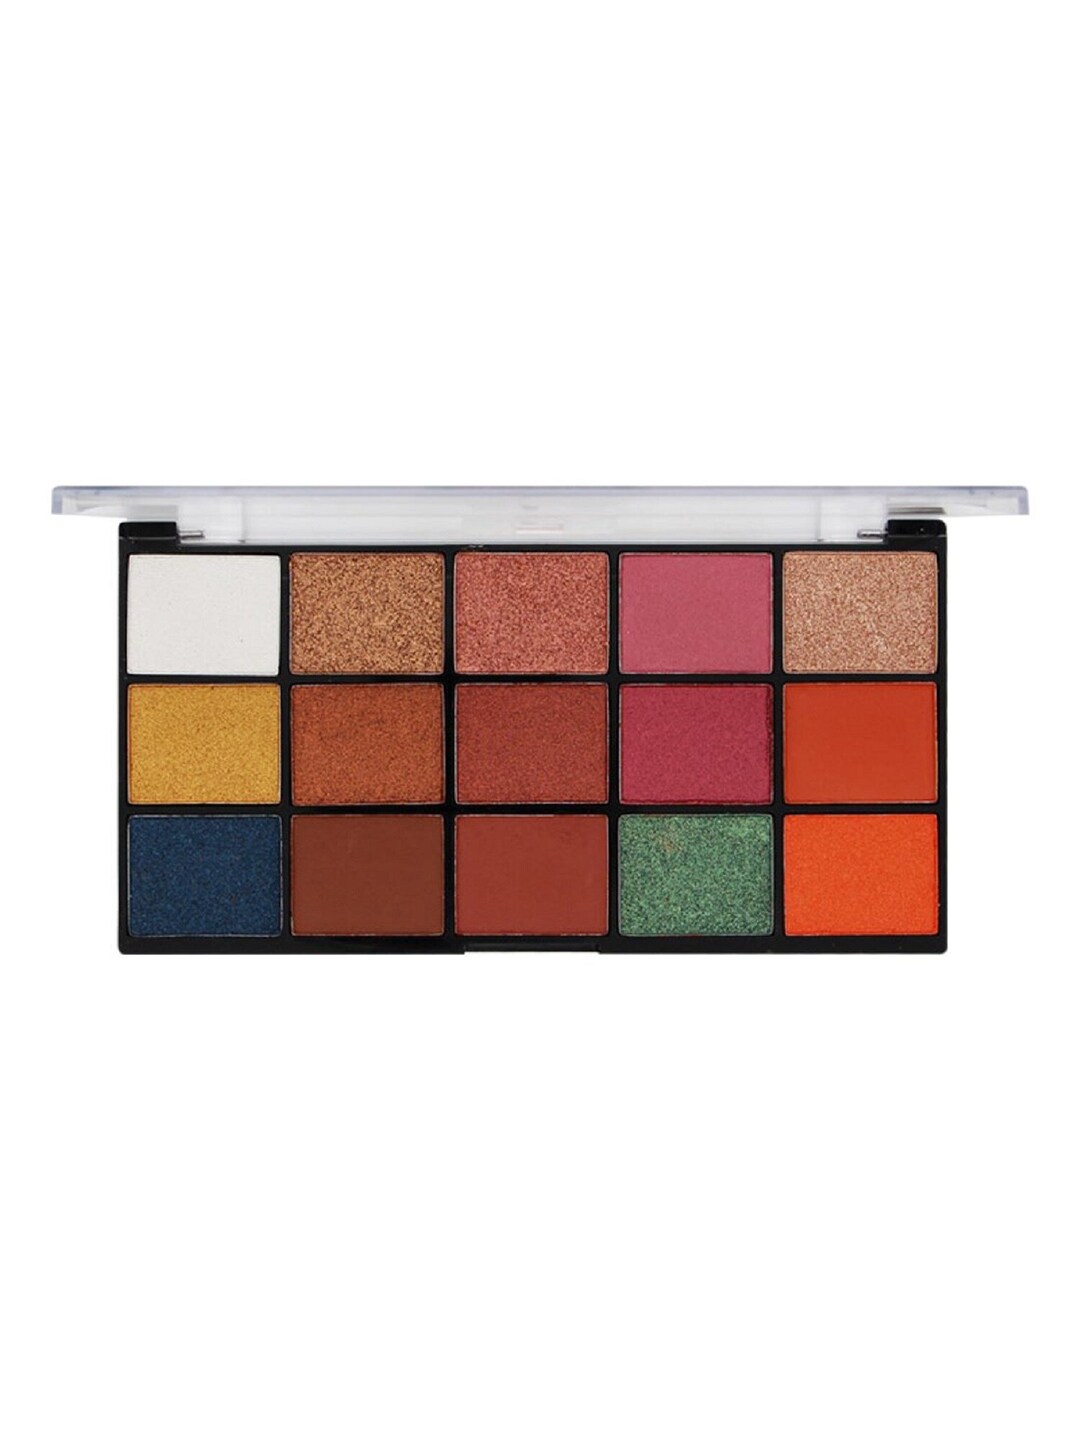 Fashion Colour 15 Shades Pro HD Vivid Eyeshadow Palette 18 g - Shade 02 Price in India